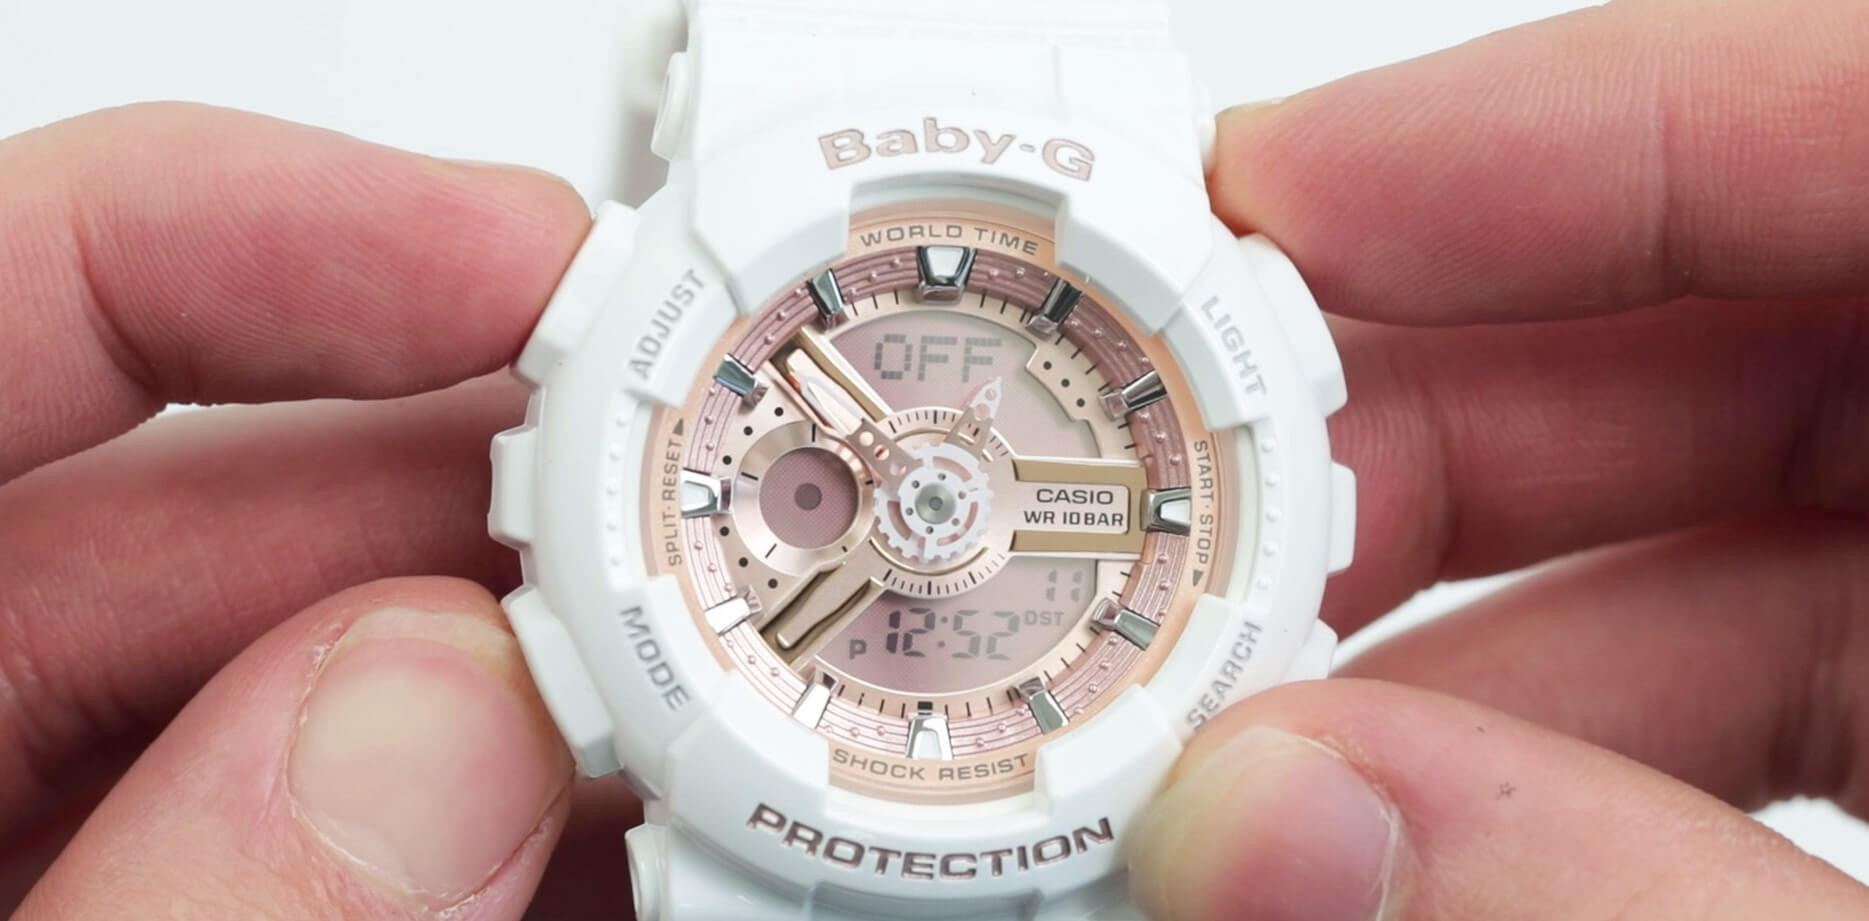 how to change time on baby-g watch: step 3